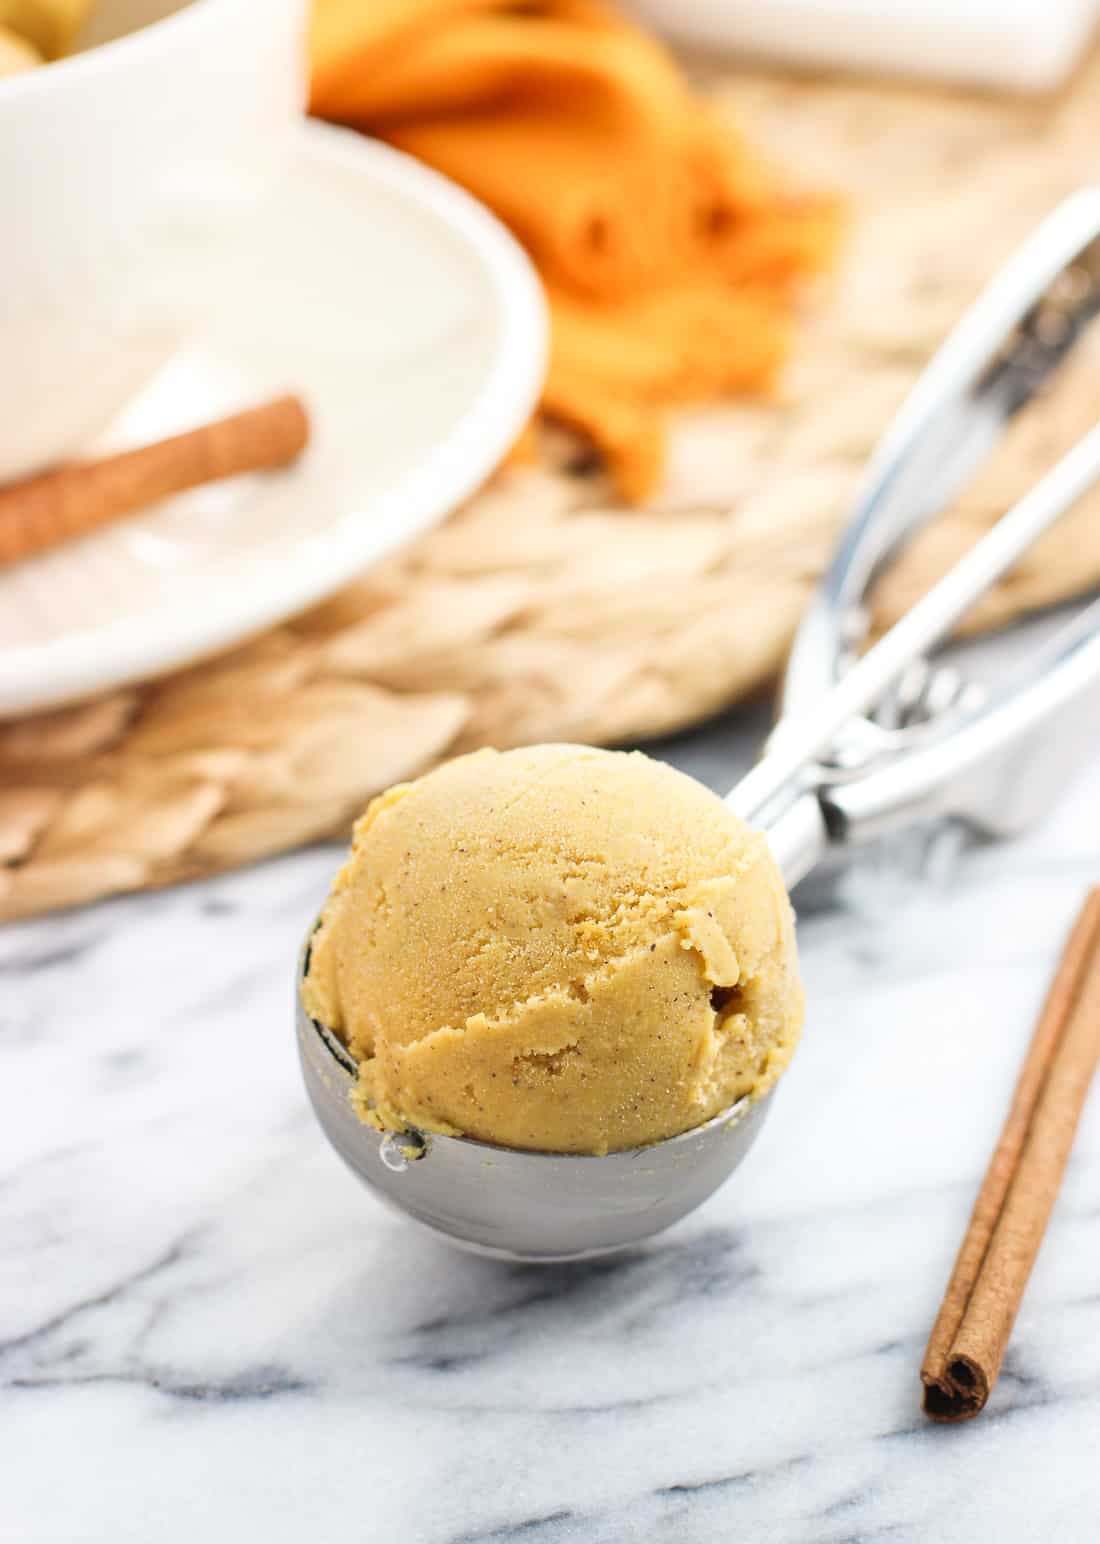 A rounded scoop of pumpkin ice cream in a metal kitchen scoop